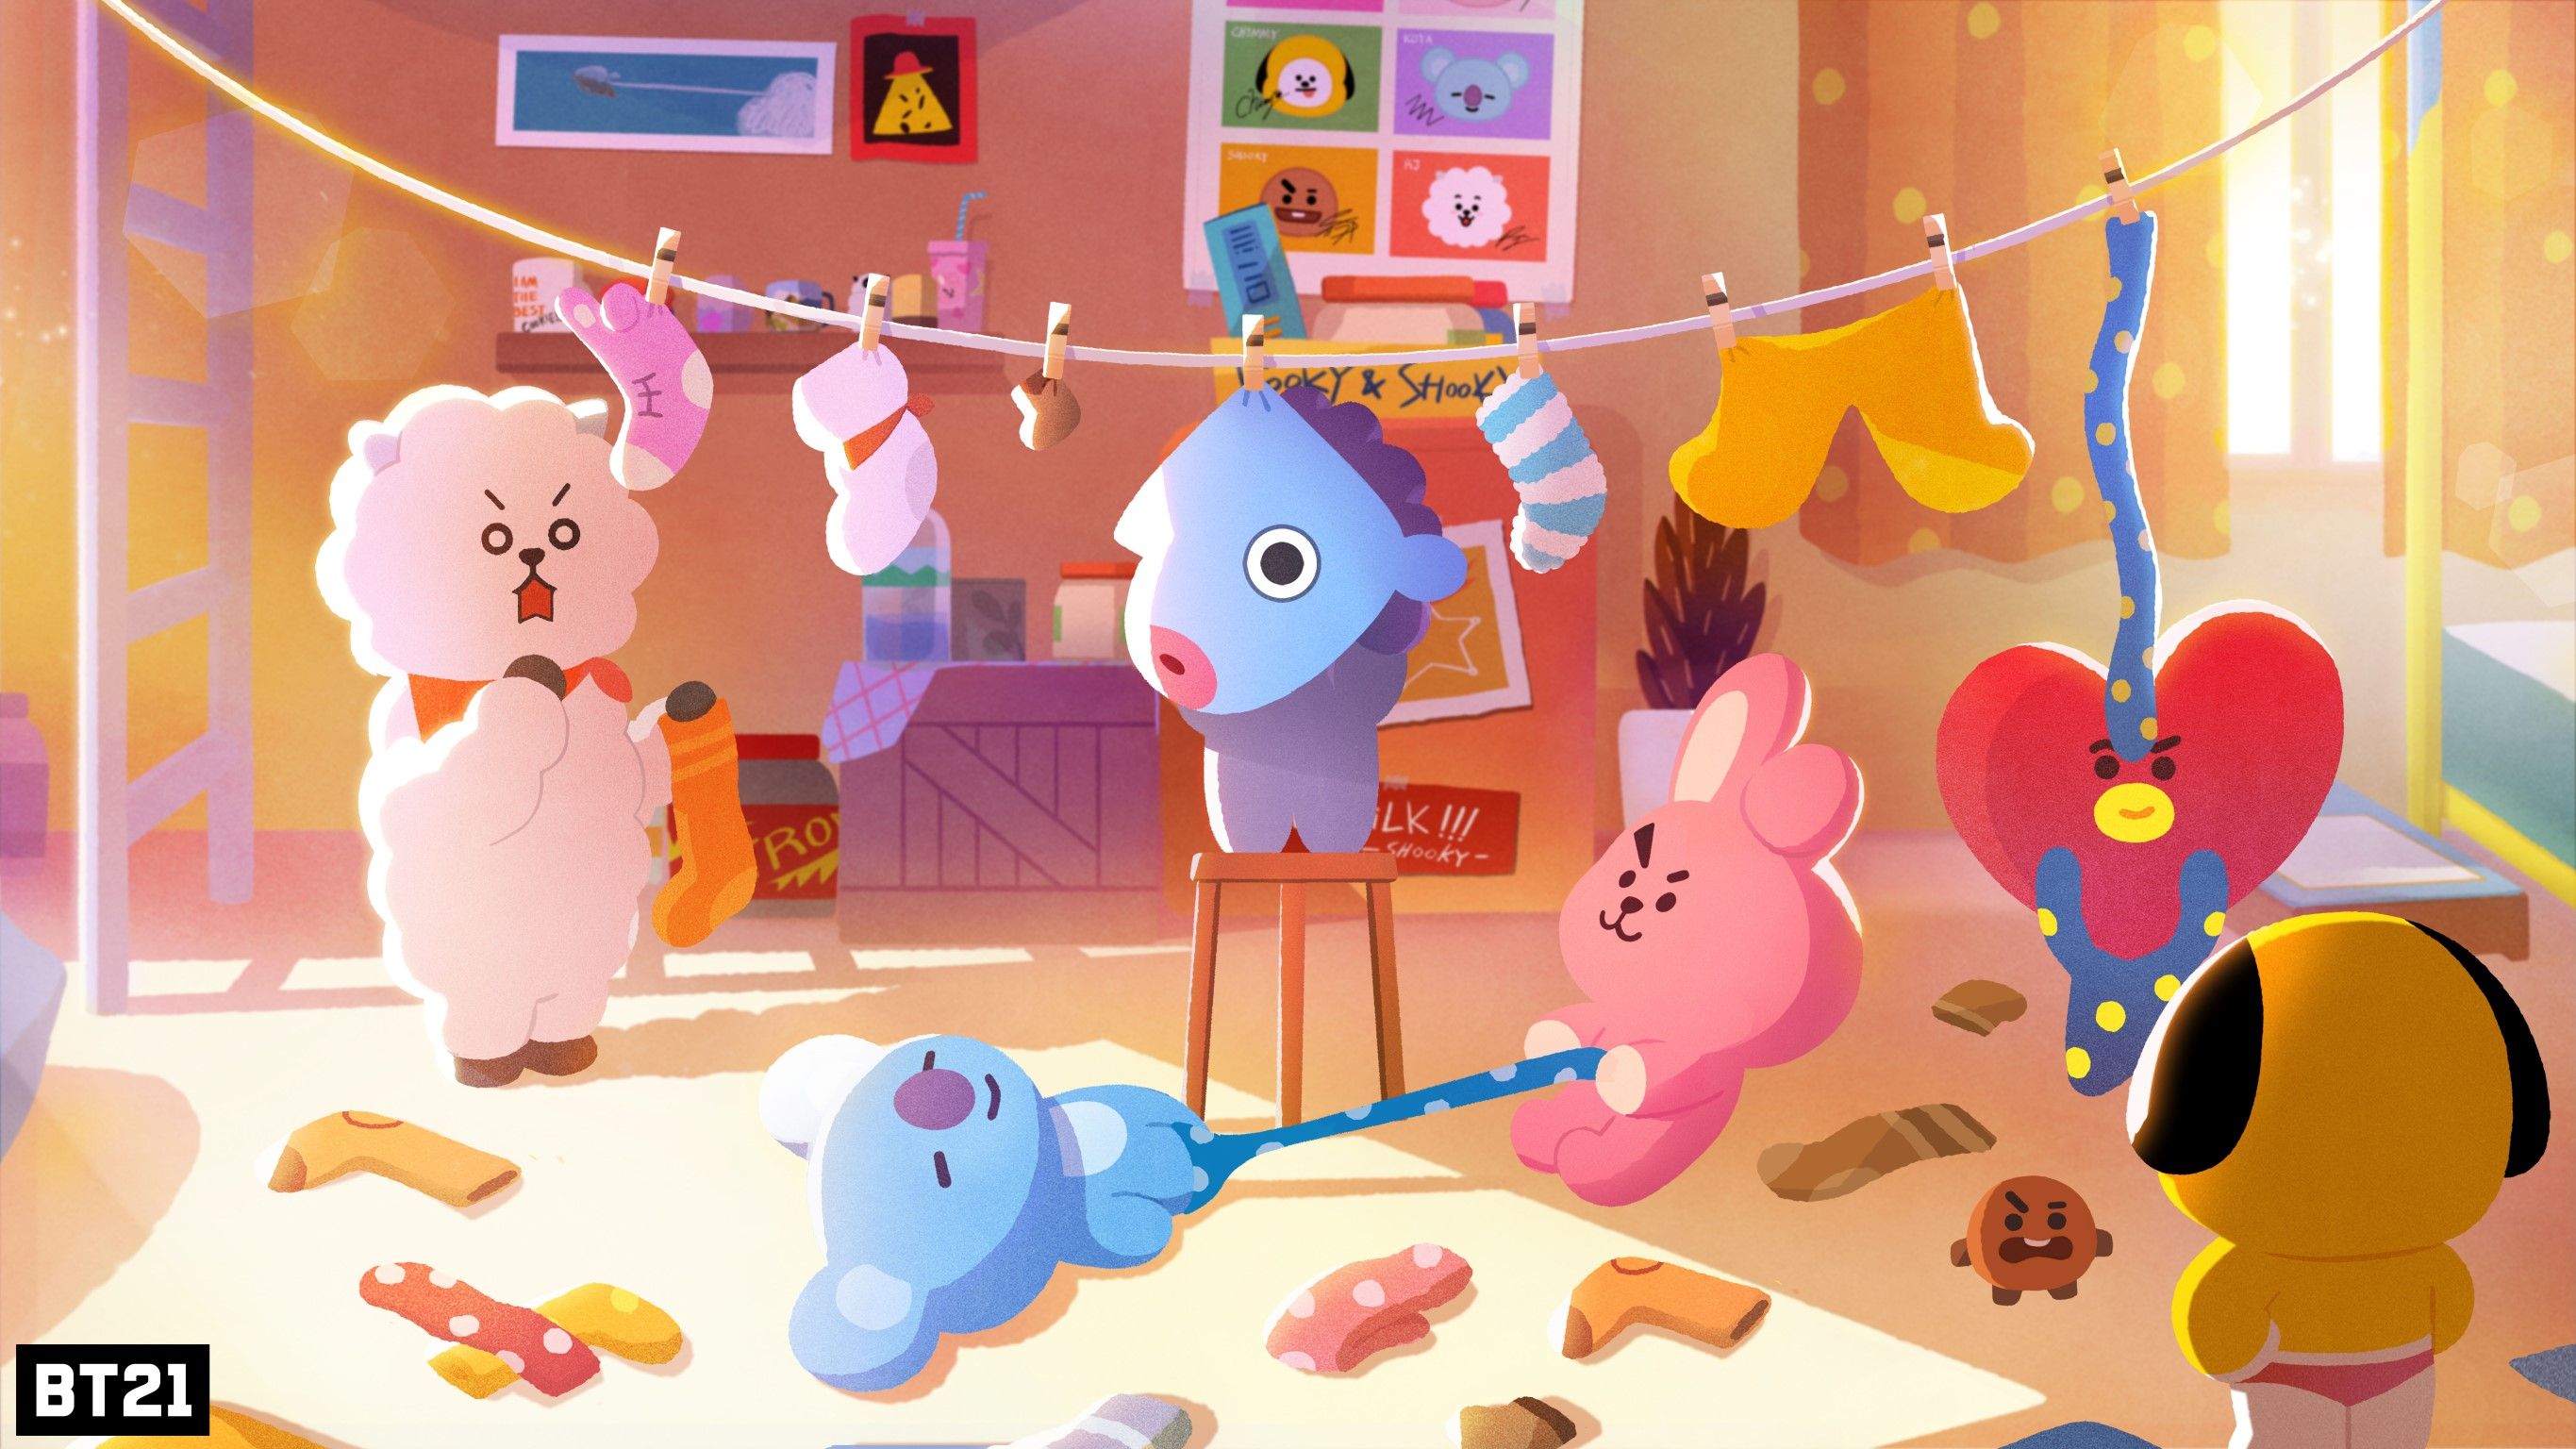 A cartoon of some toys hanging on clothesline - BT21